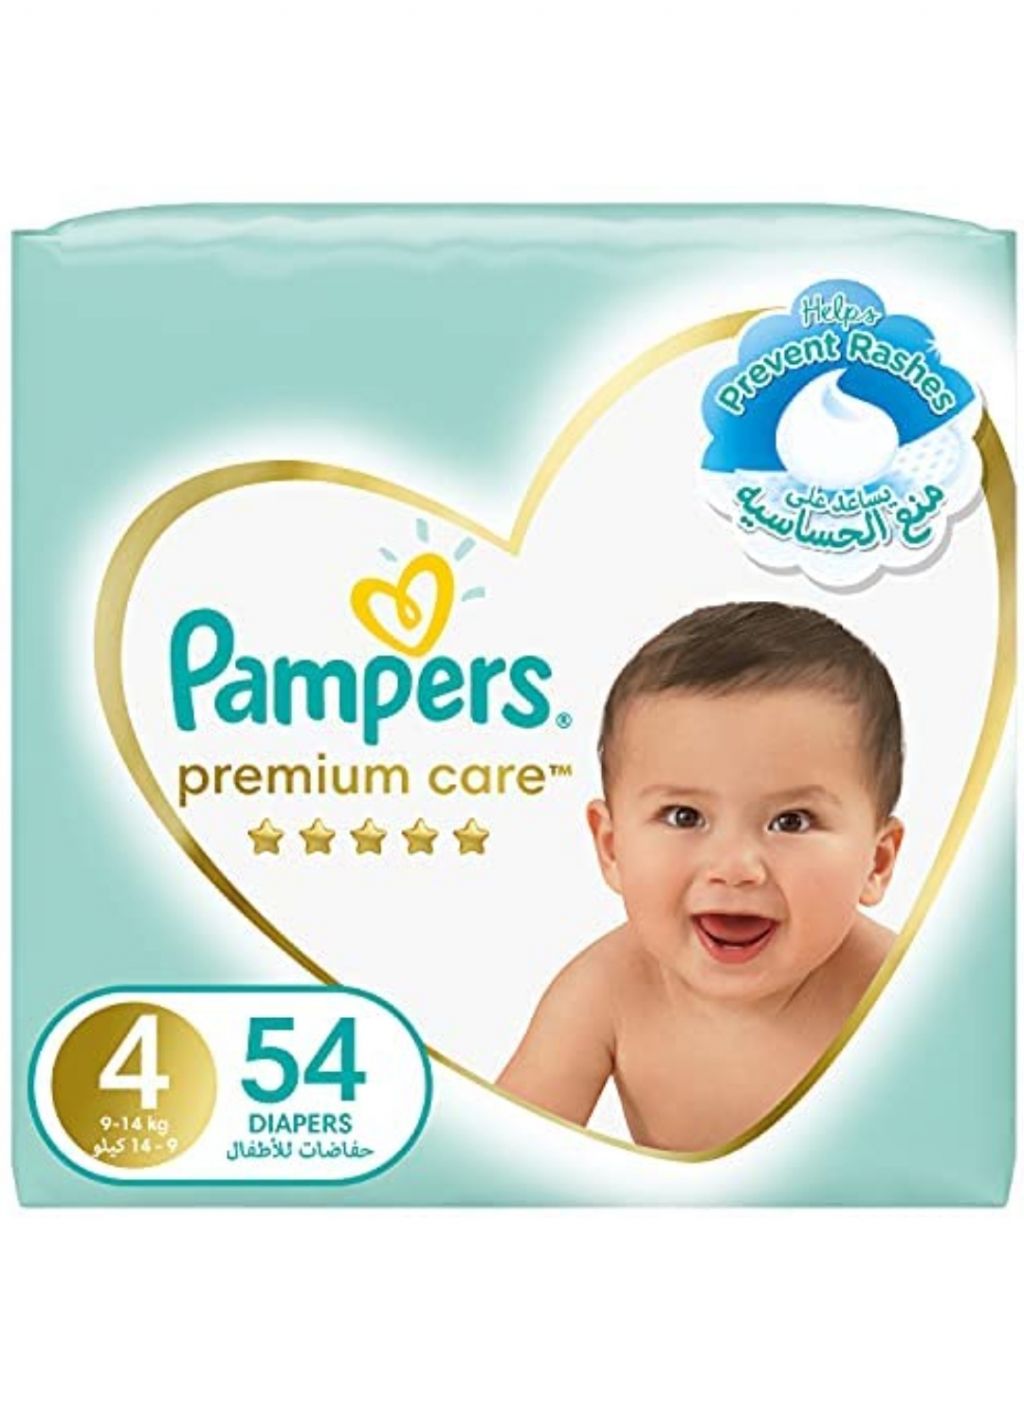 Diapering Promotions offer - in Dubai #1162 - 1  image 